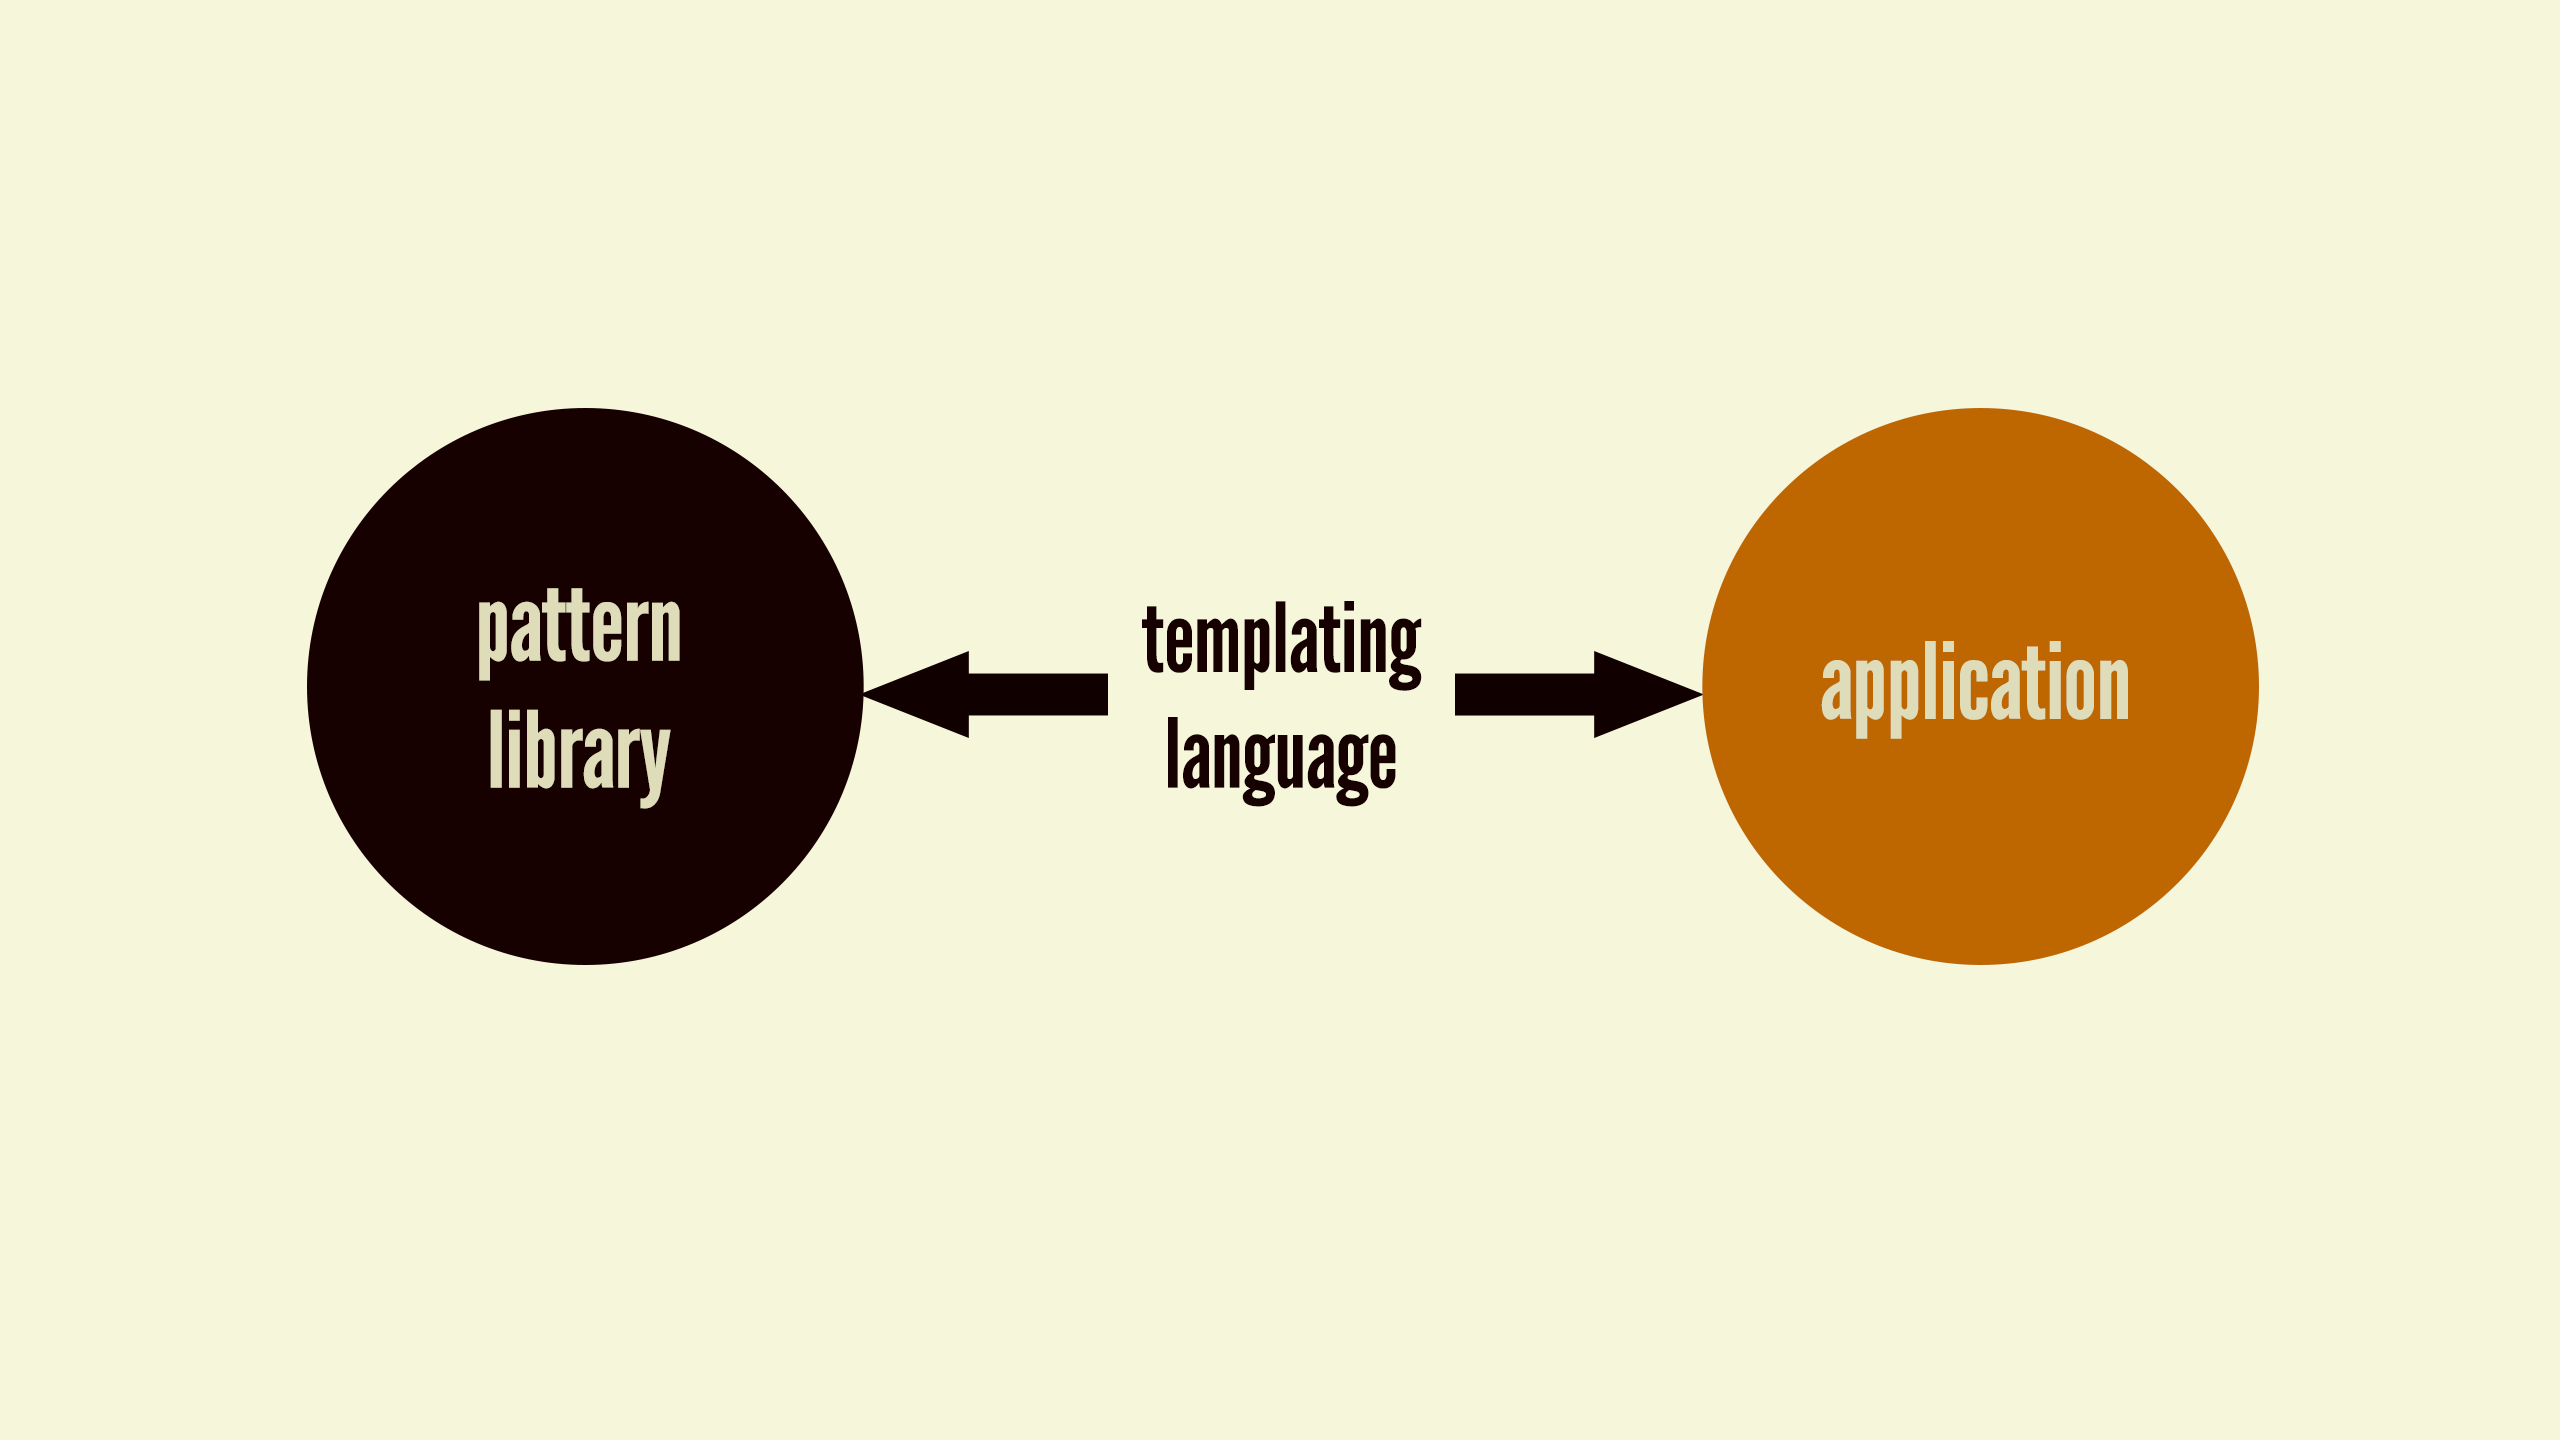 A templating language like Mustache, Handlebars, Underscore, Jade, and others can serve as a bridge that allows front-end code to be shared between the pattern library and production application.